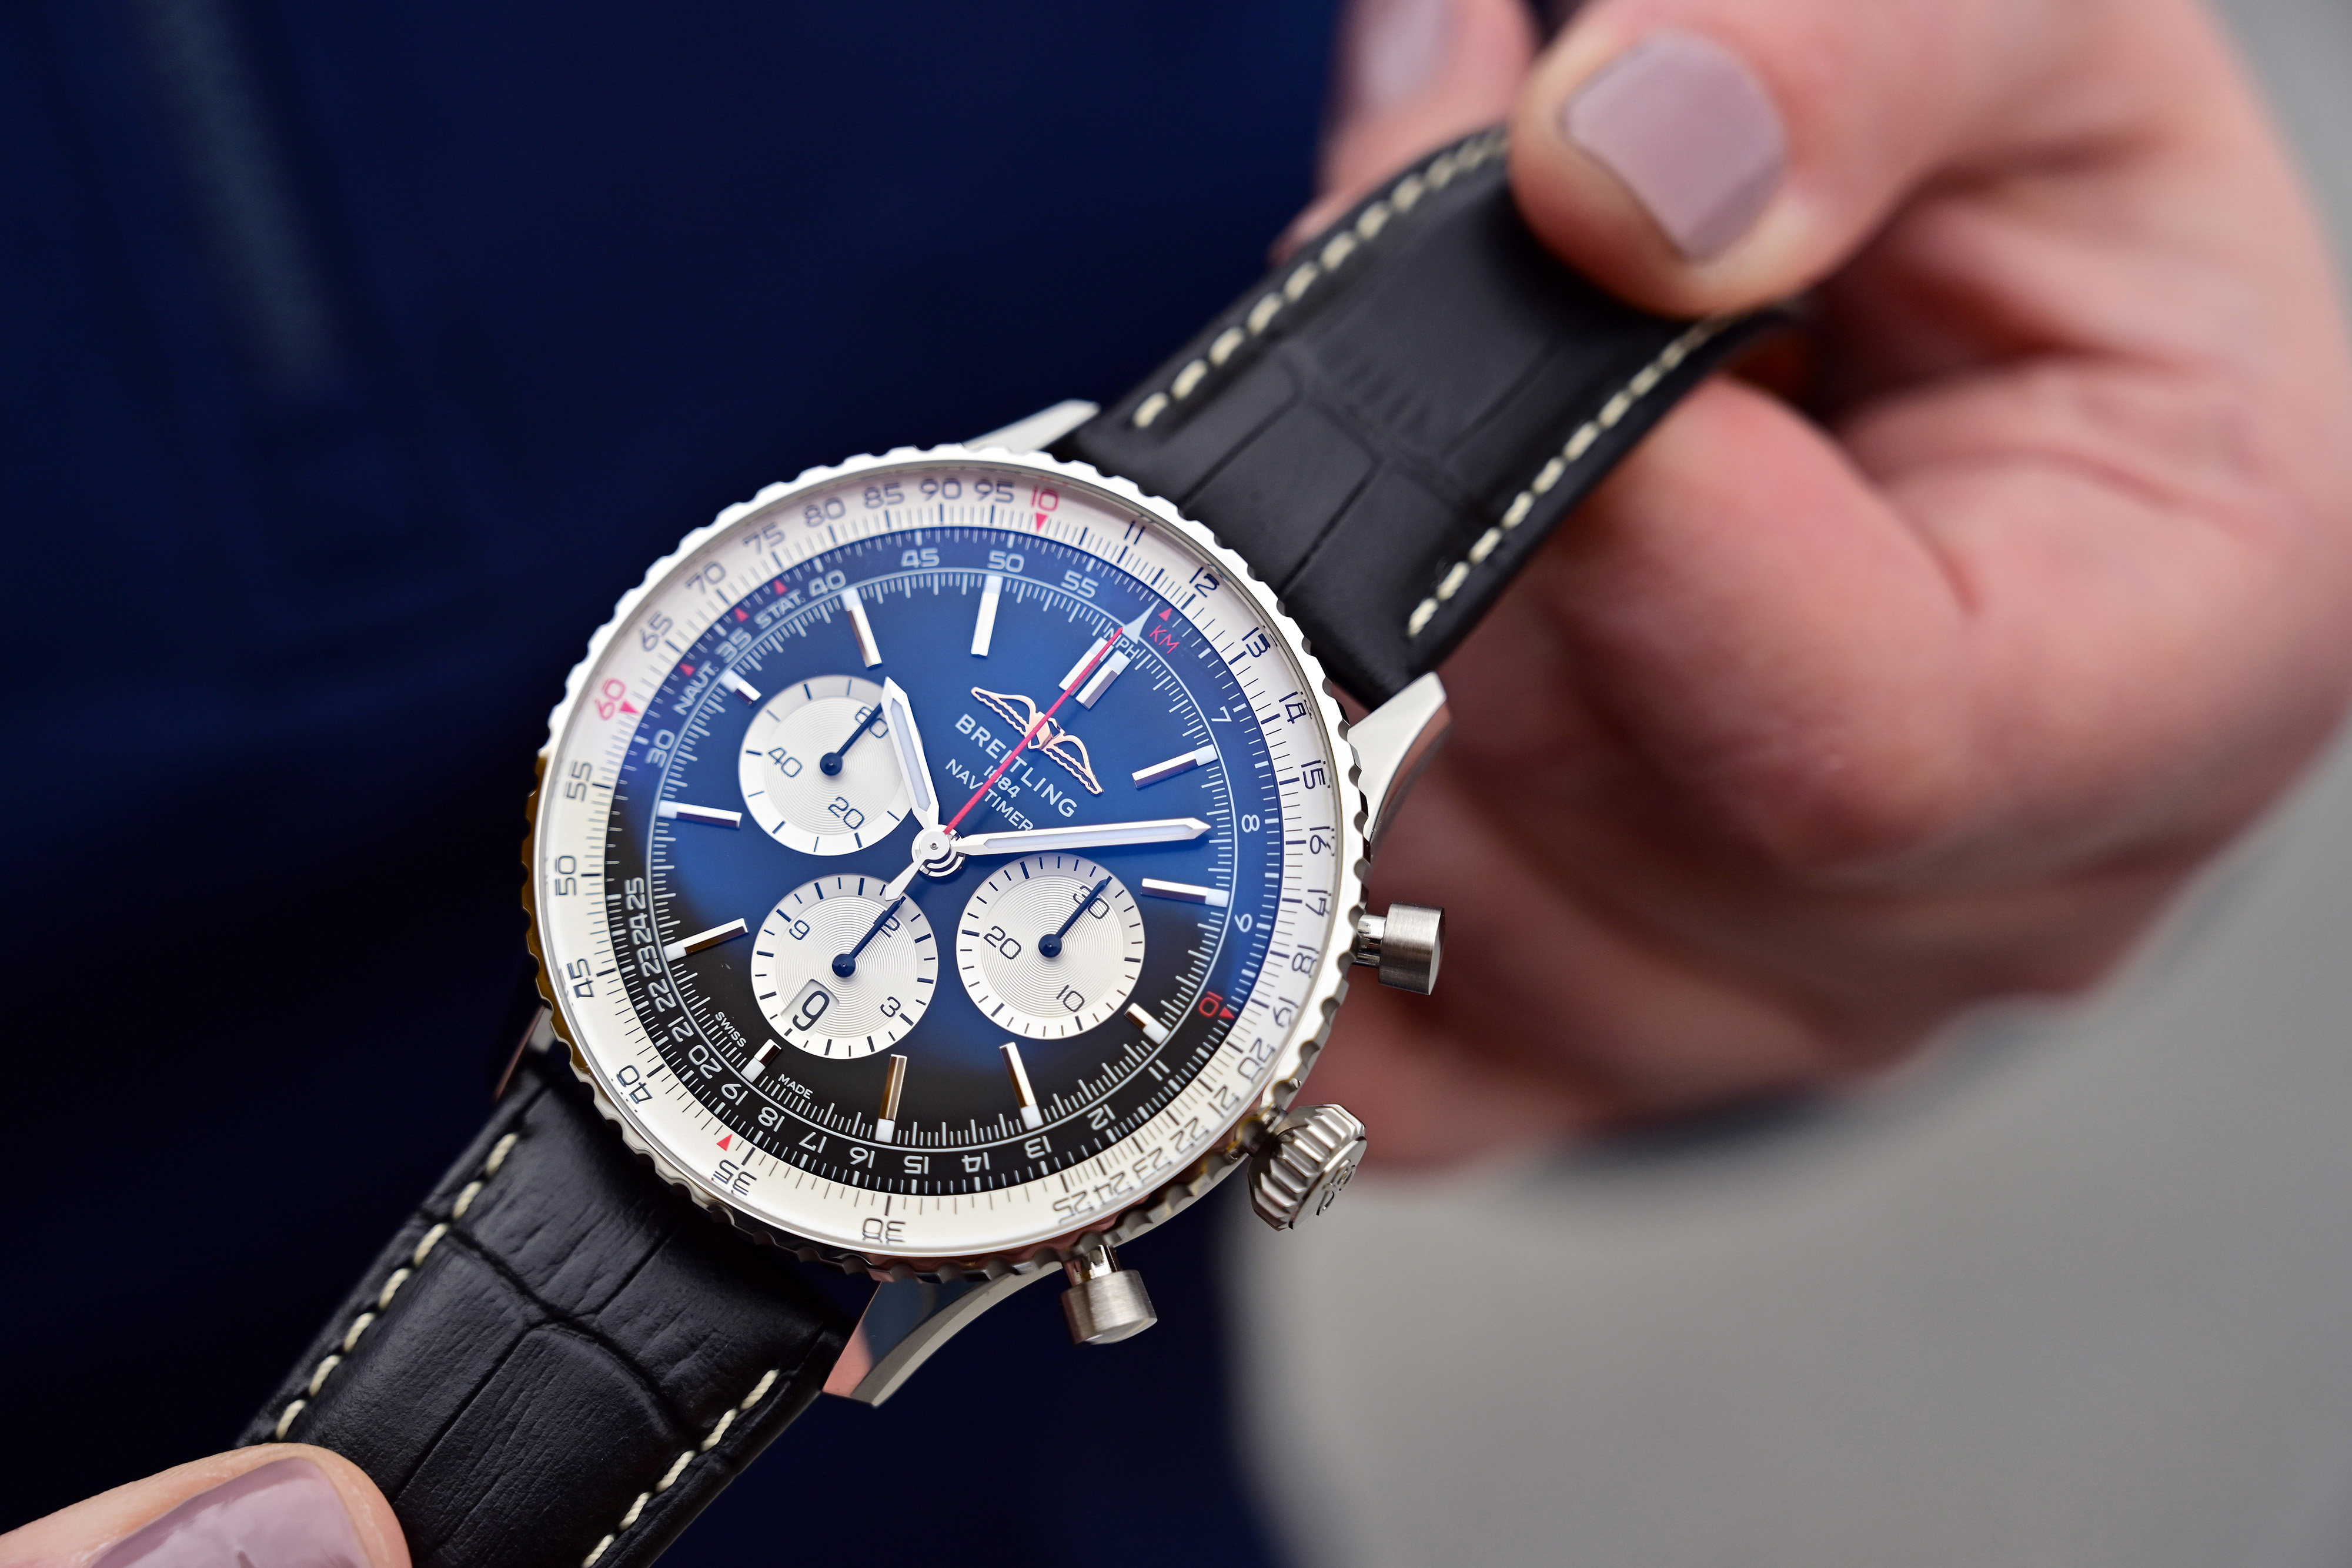 New Release: Breitling Navitimer B01 Chronograph 46 U.S. Limited-Edition  Watch